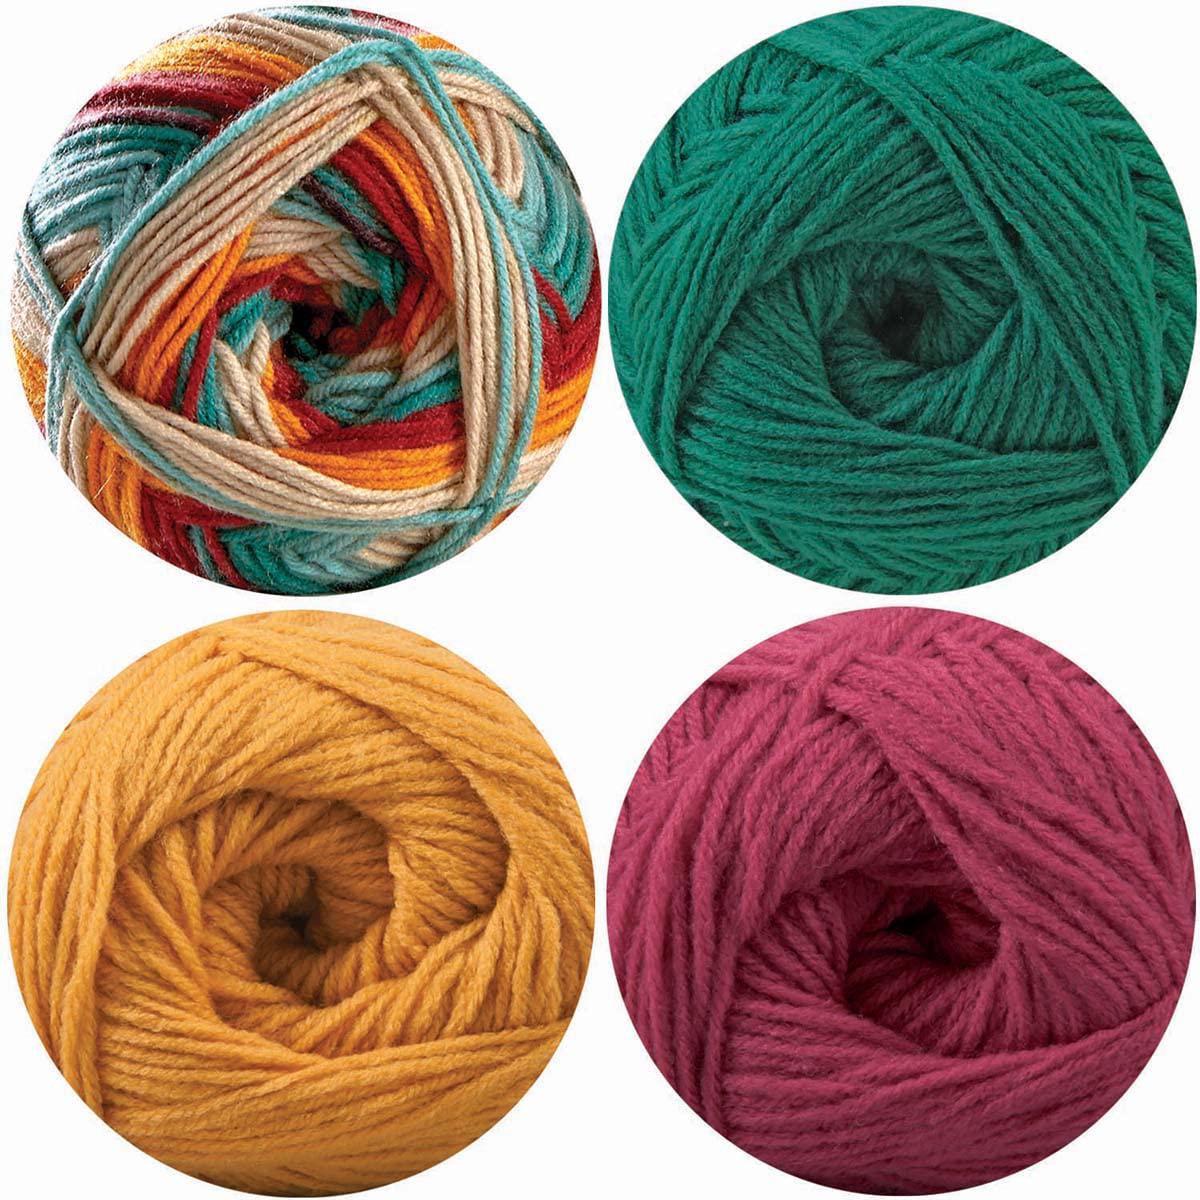 Herrschners worsted 8 stripes yarn pack